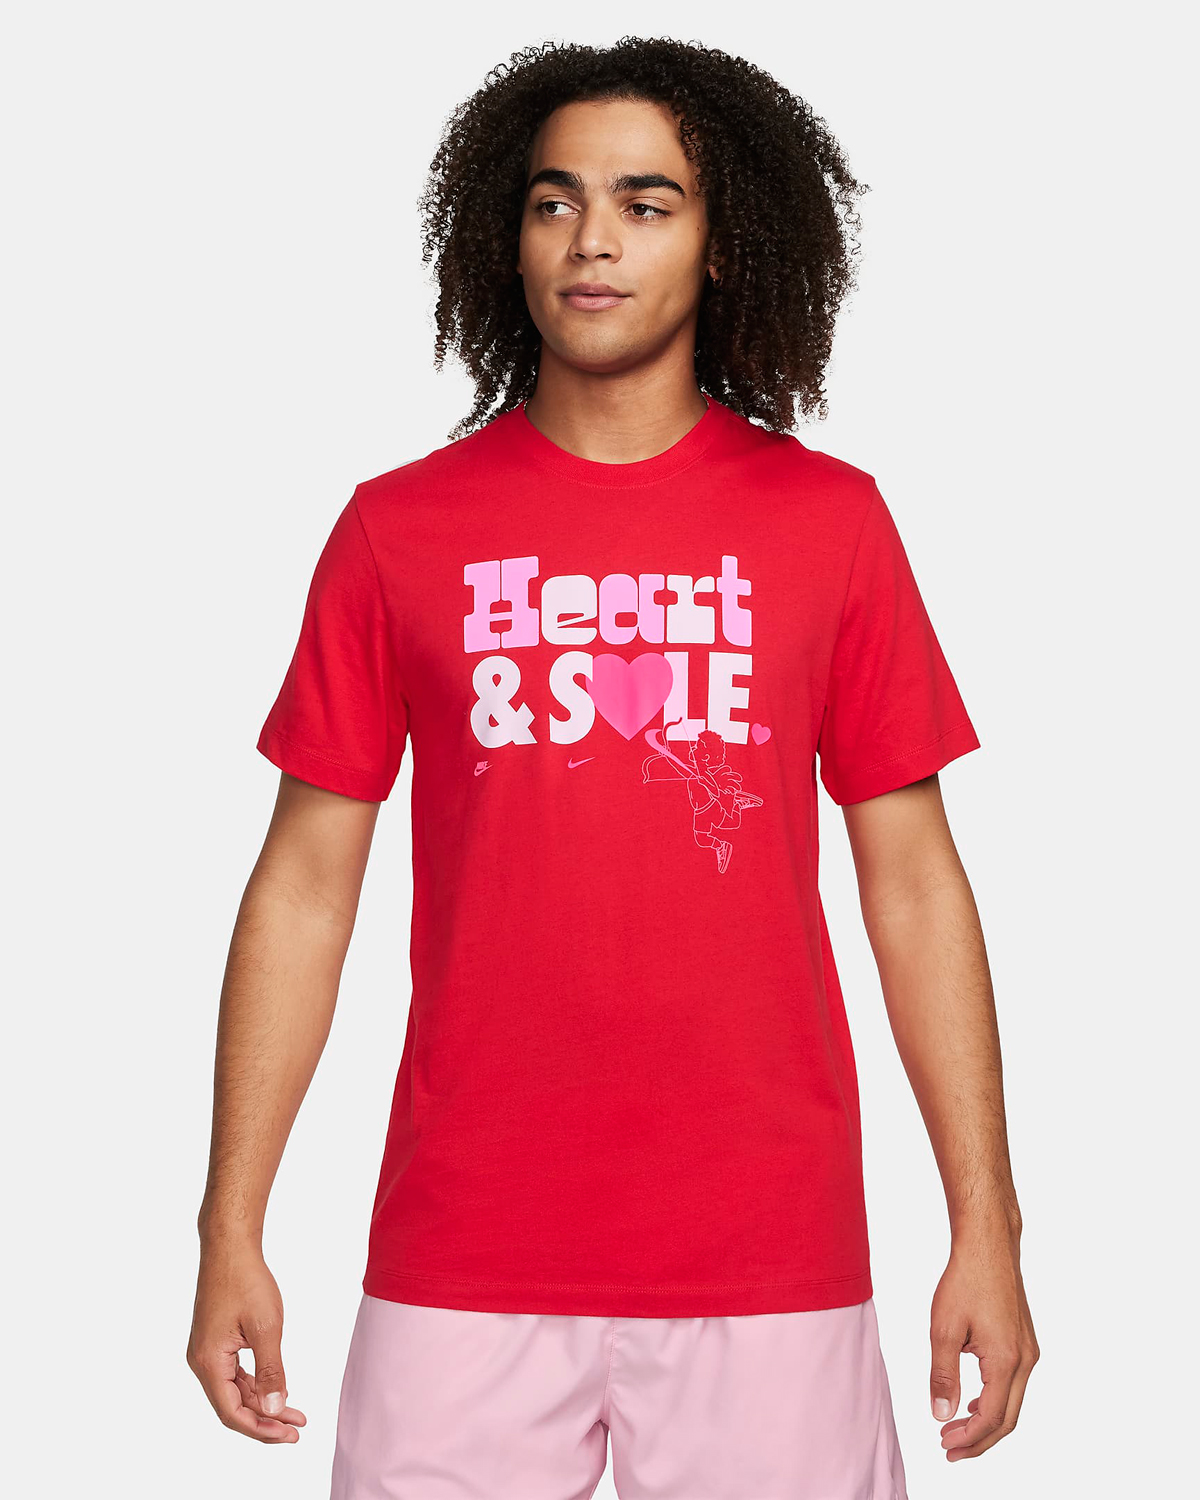 Nike-Valentines-Day-Heart-and-Sole-Shirt-Red-1